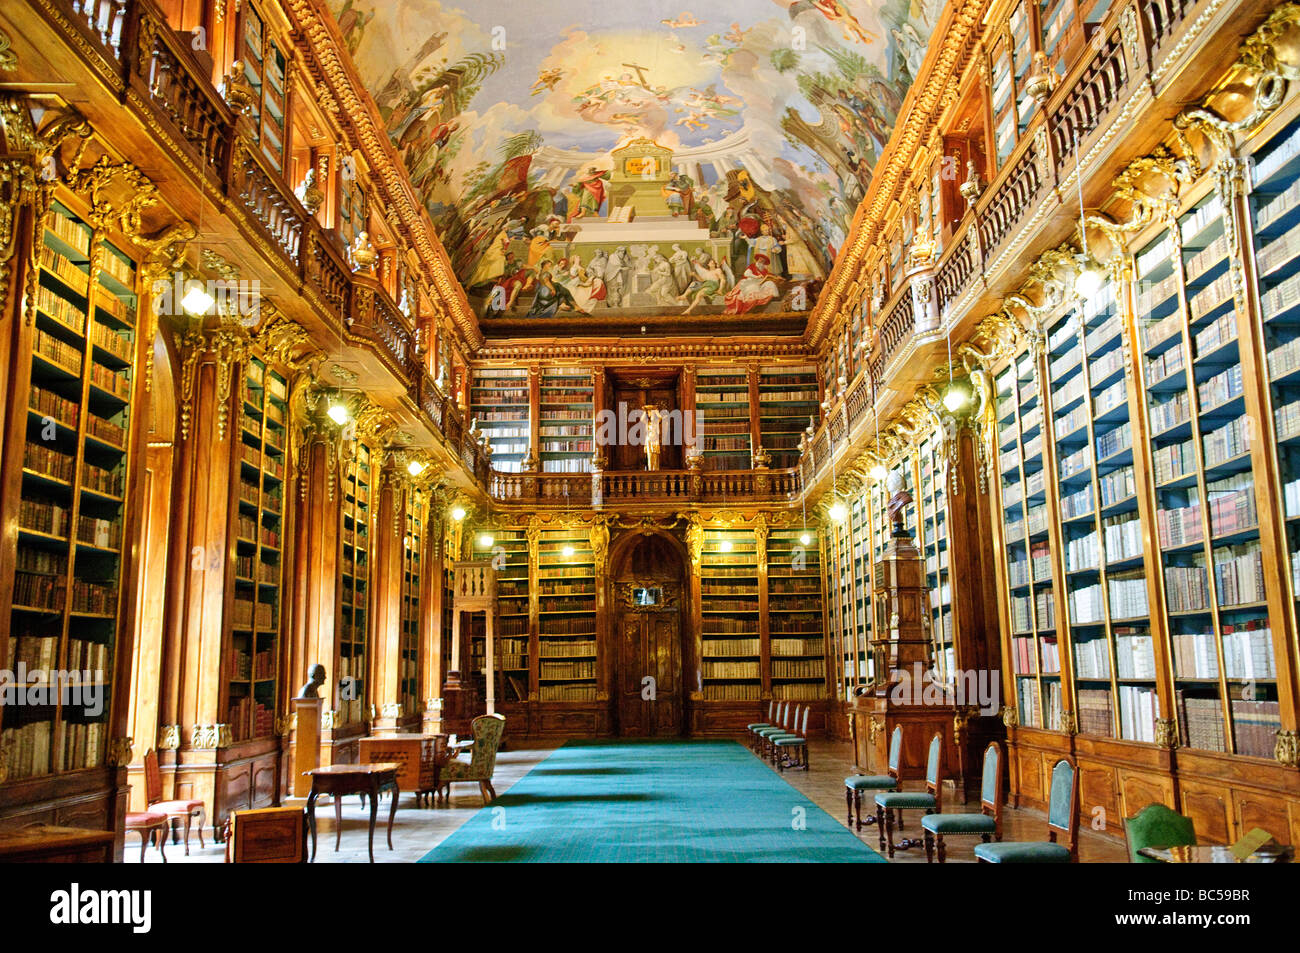 PRAGUE, Czech Republic - The Theological Hall in the Strahov Library. Designed in the Baroque style by Giovanni Domenico Orsi in 1679. Stock Photo